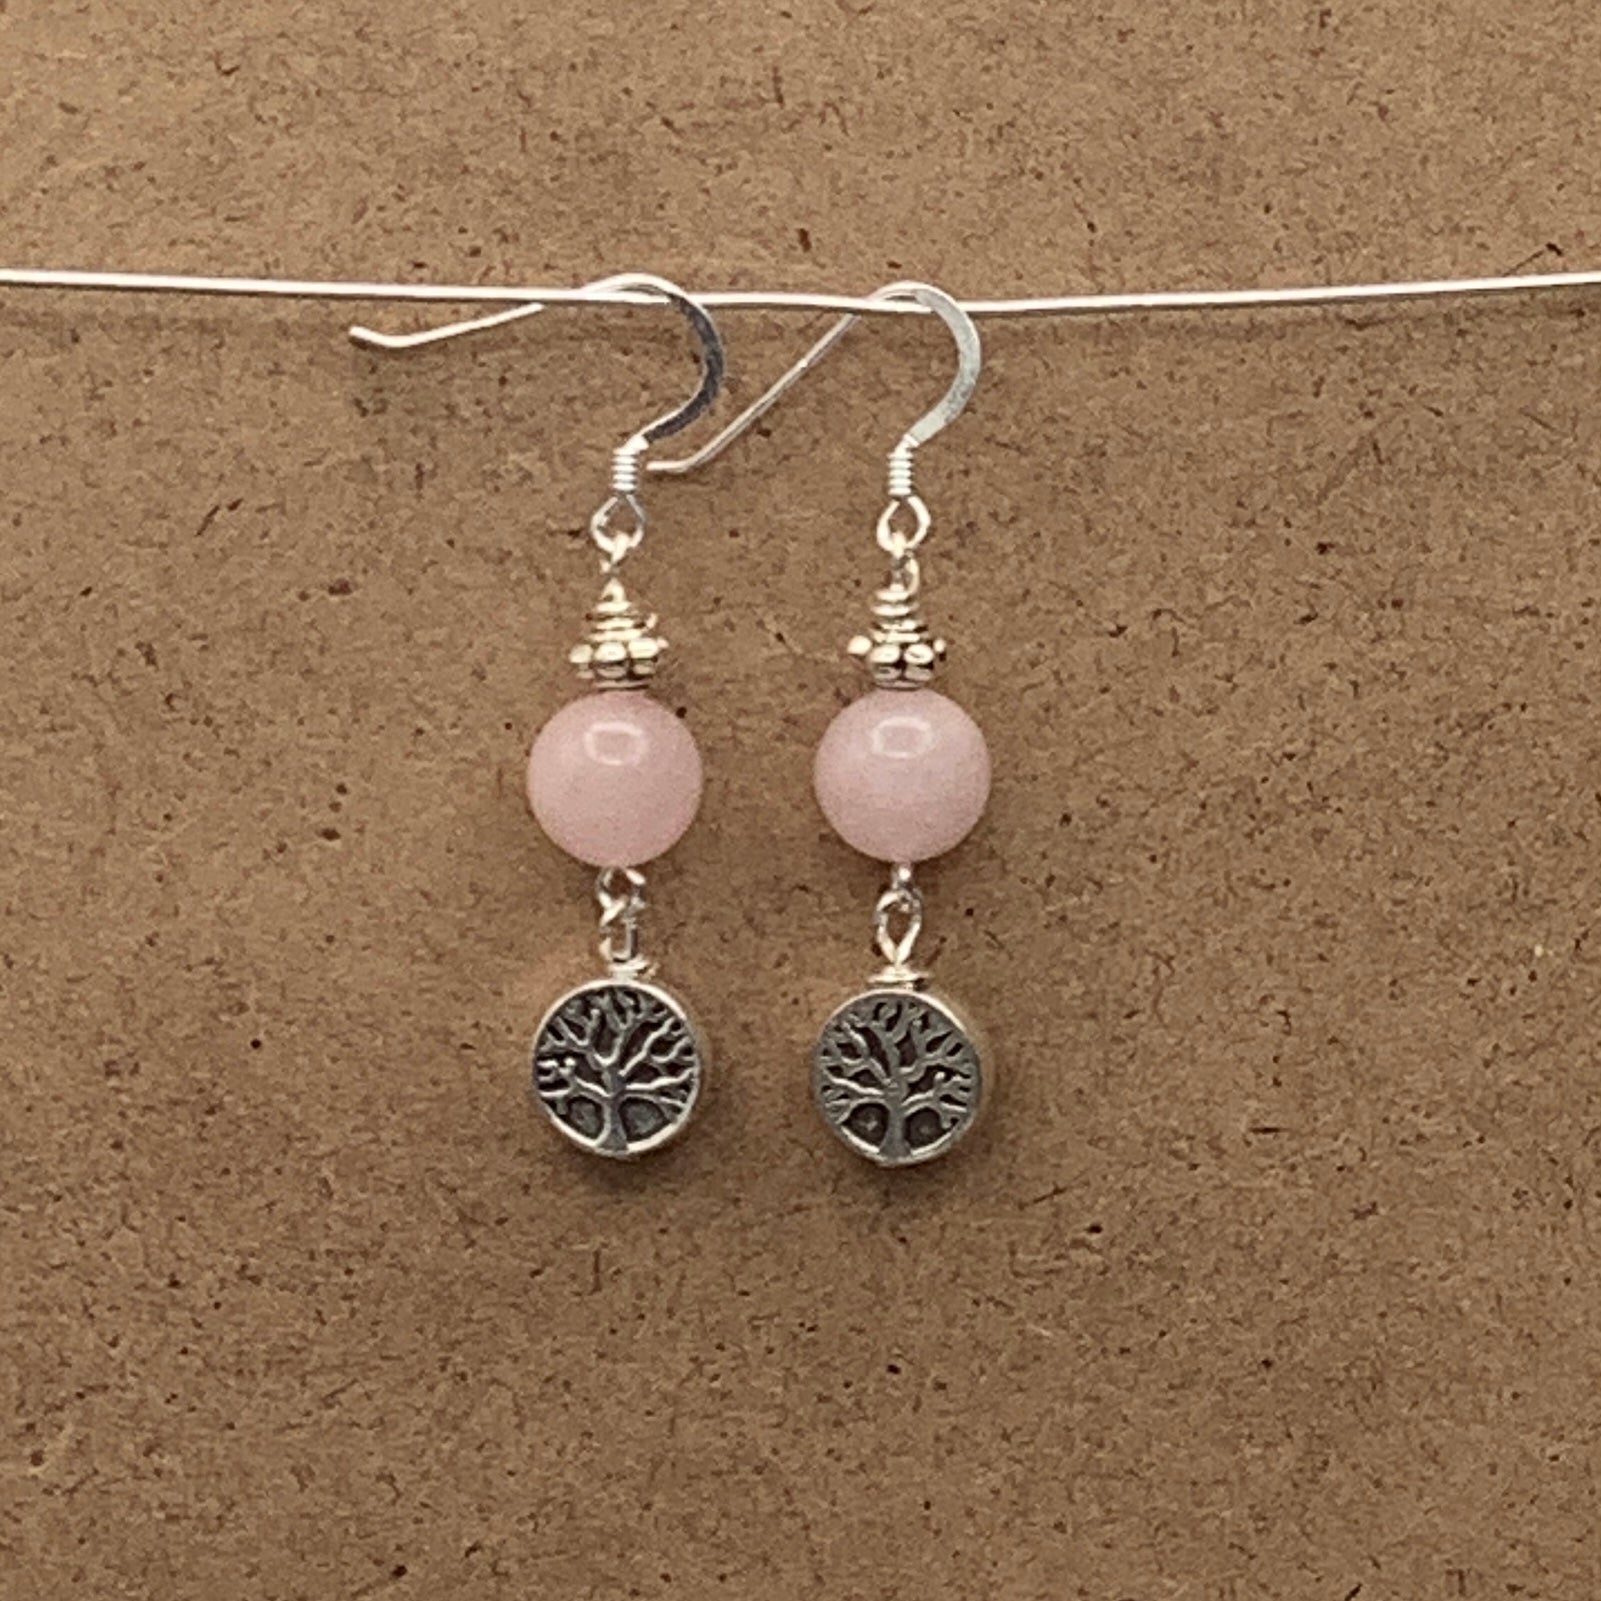 Rose Quartz Tree of Life Earrings and Sterling Silver Earwire